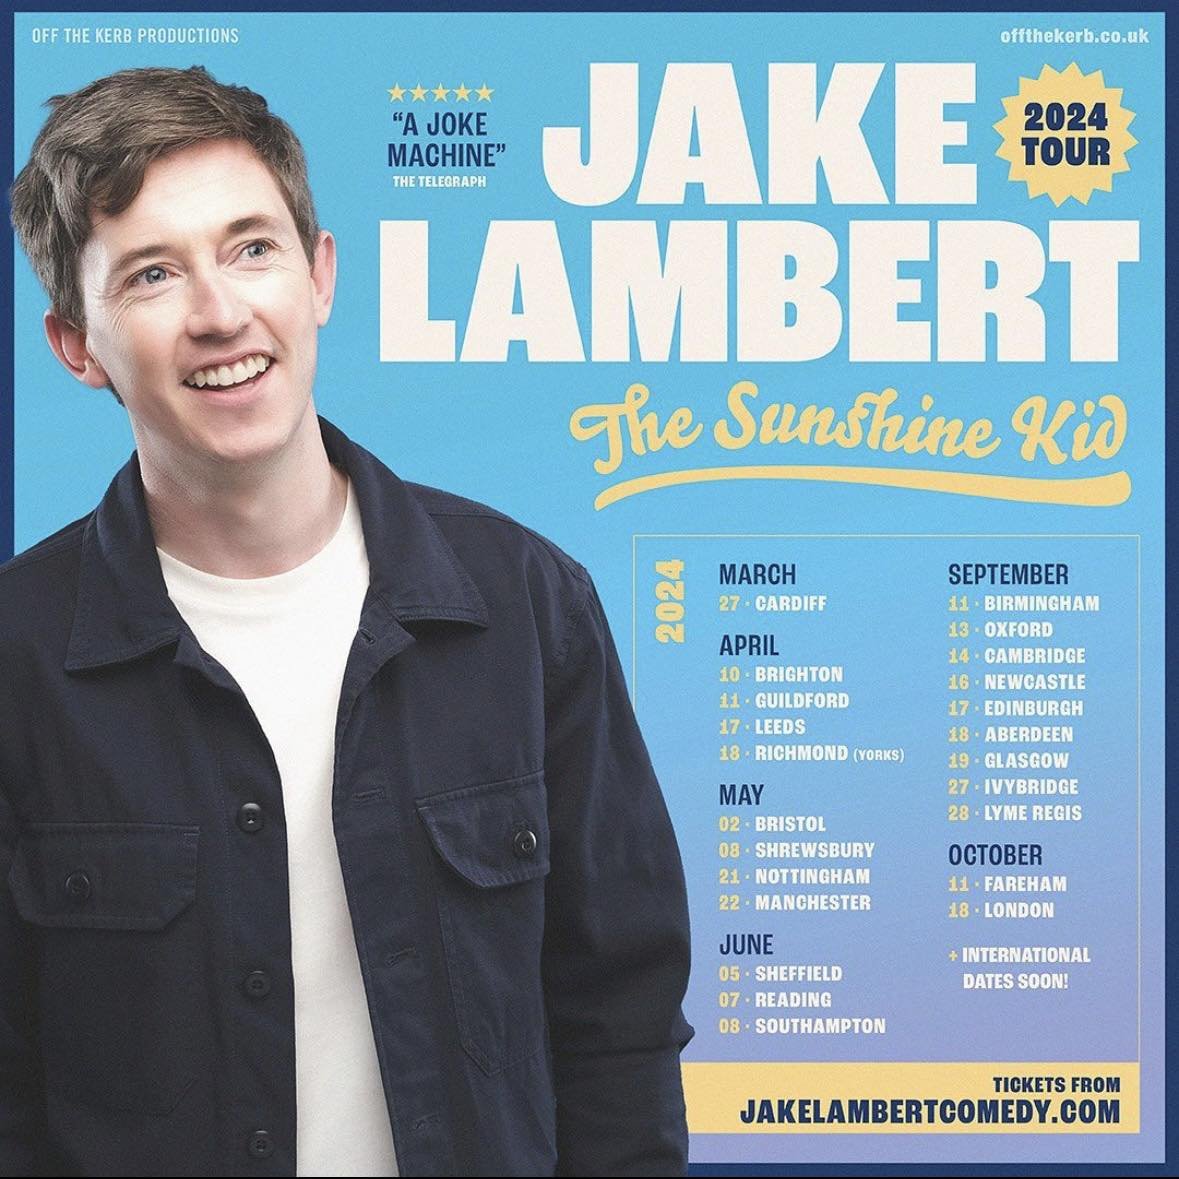 🎙 WHAT’S ON IN MAY? 🎙 There’s a whole host of spectacular acts coming to Canalhouse on tour this year, curtesy of @NCFComedy! Tickets are selling out fast – reserve your place: ncfcomedy.co.uk/events.html_26… 21ST MAY ☀️ Jake Lambert: The Sunshine Kid (doors 7:30pm • starts 8pm)